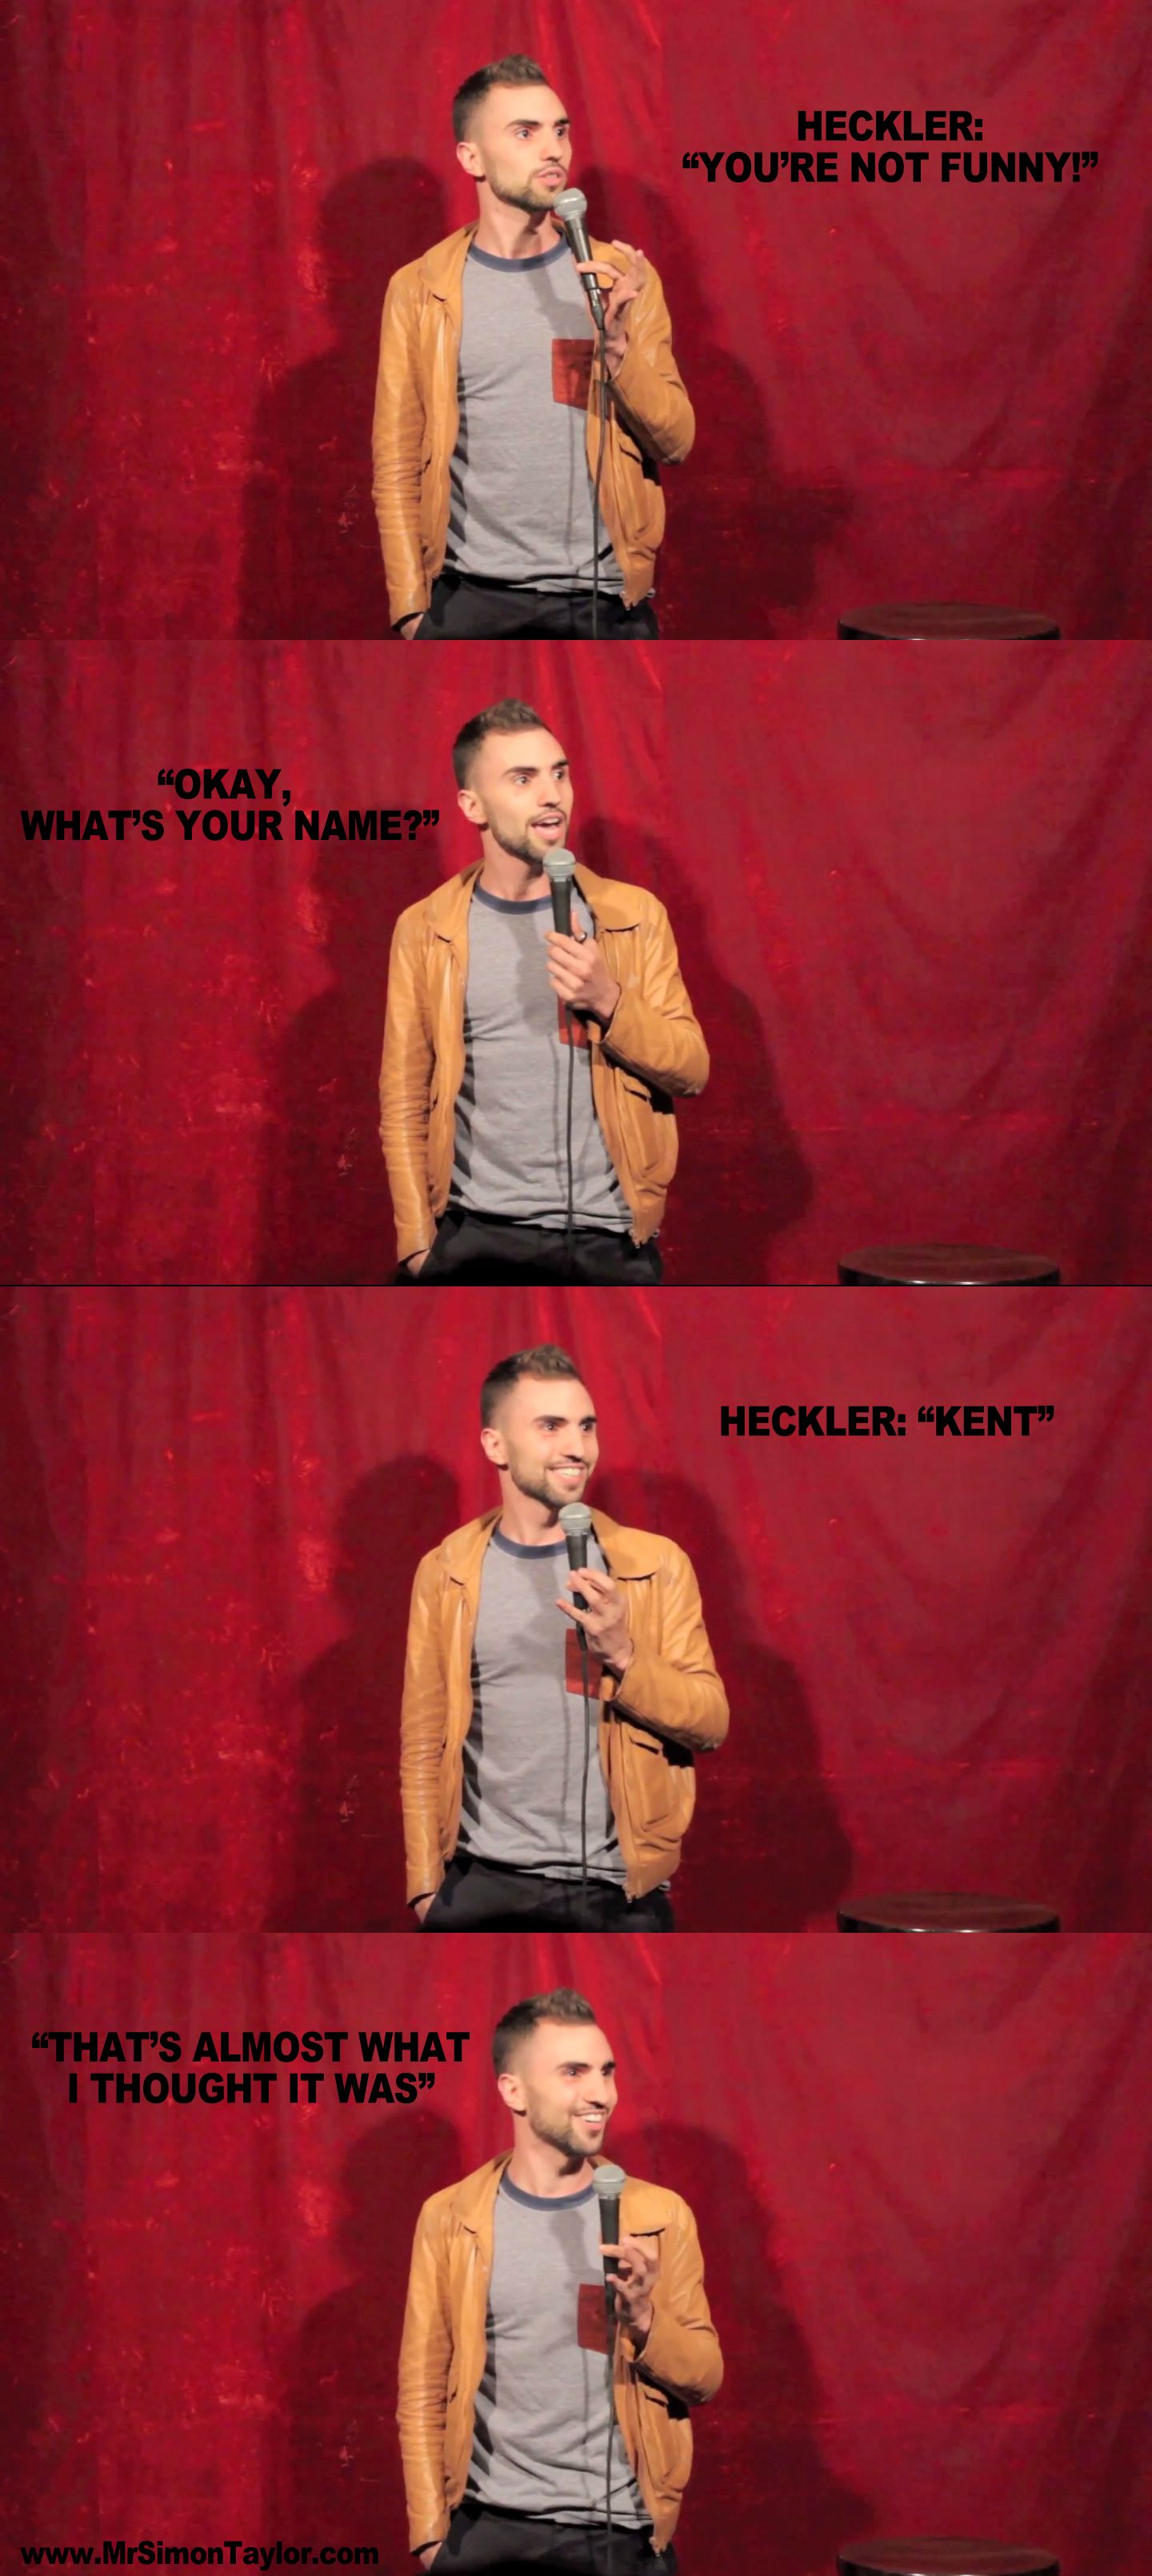 poster - Heckler You'Re Not Funny!" "Okay, What'S Your Name?!! Heckler Kent" That'S Almost What I Thought It Was"